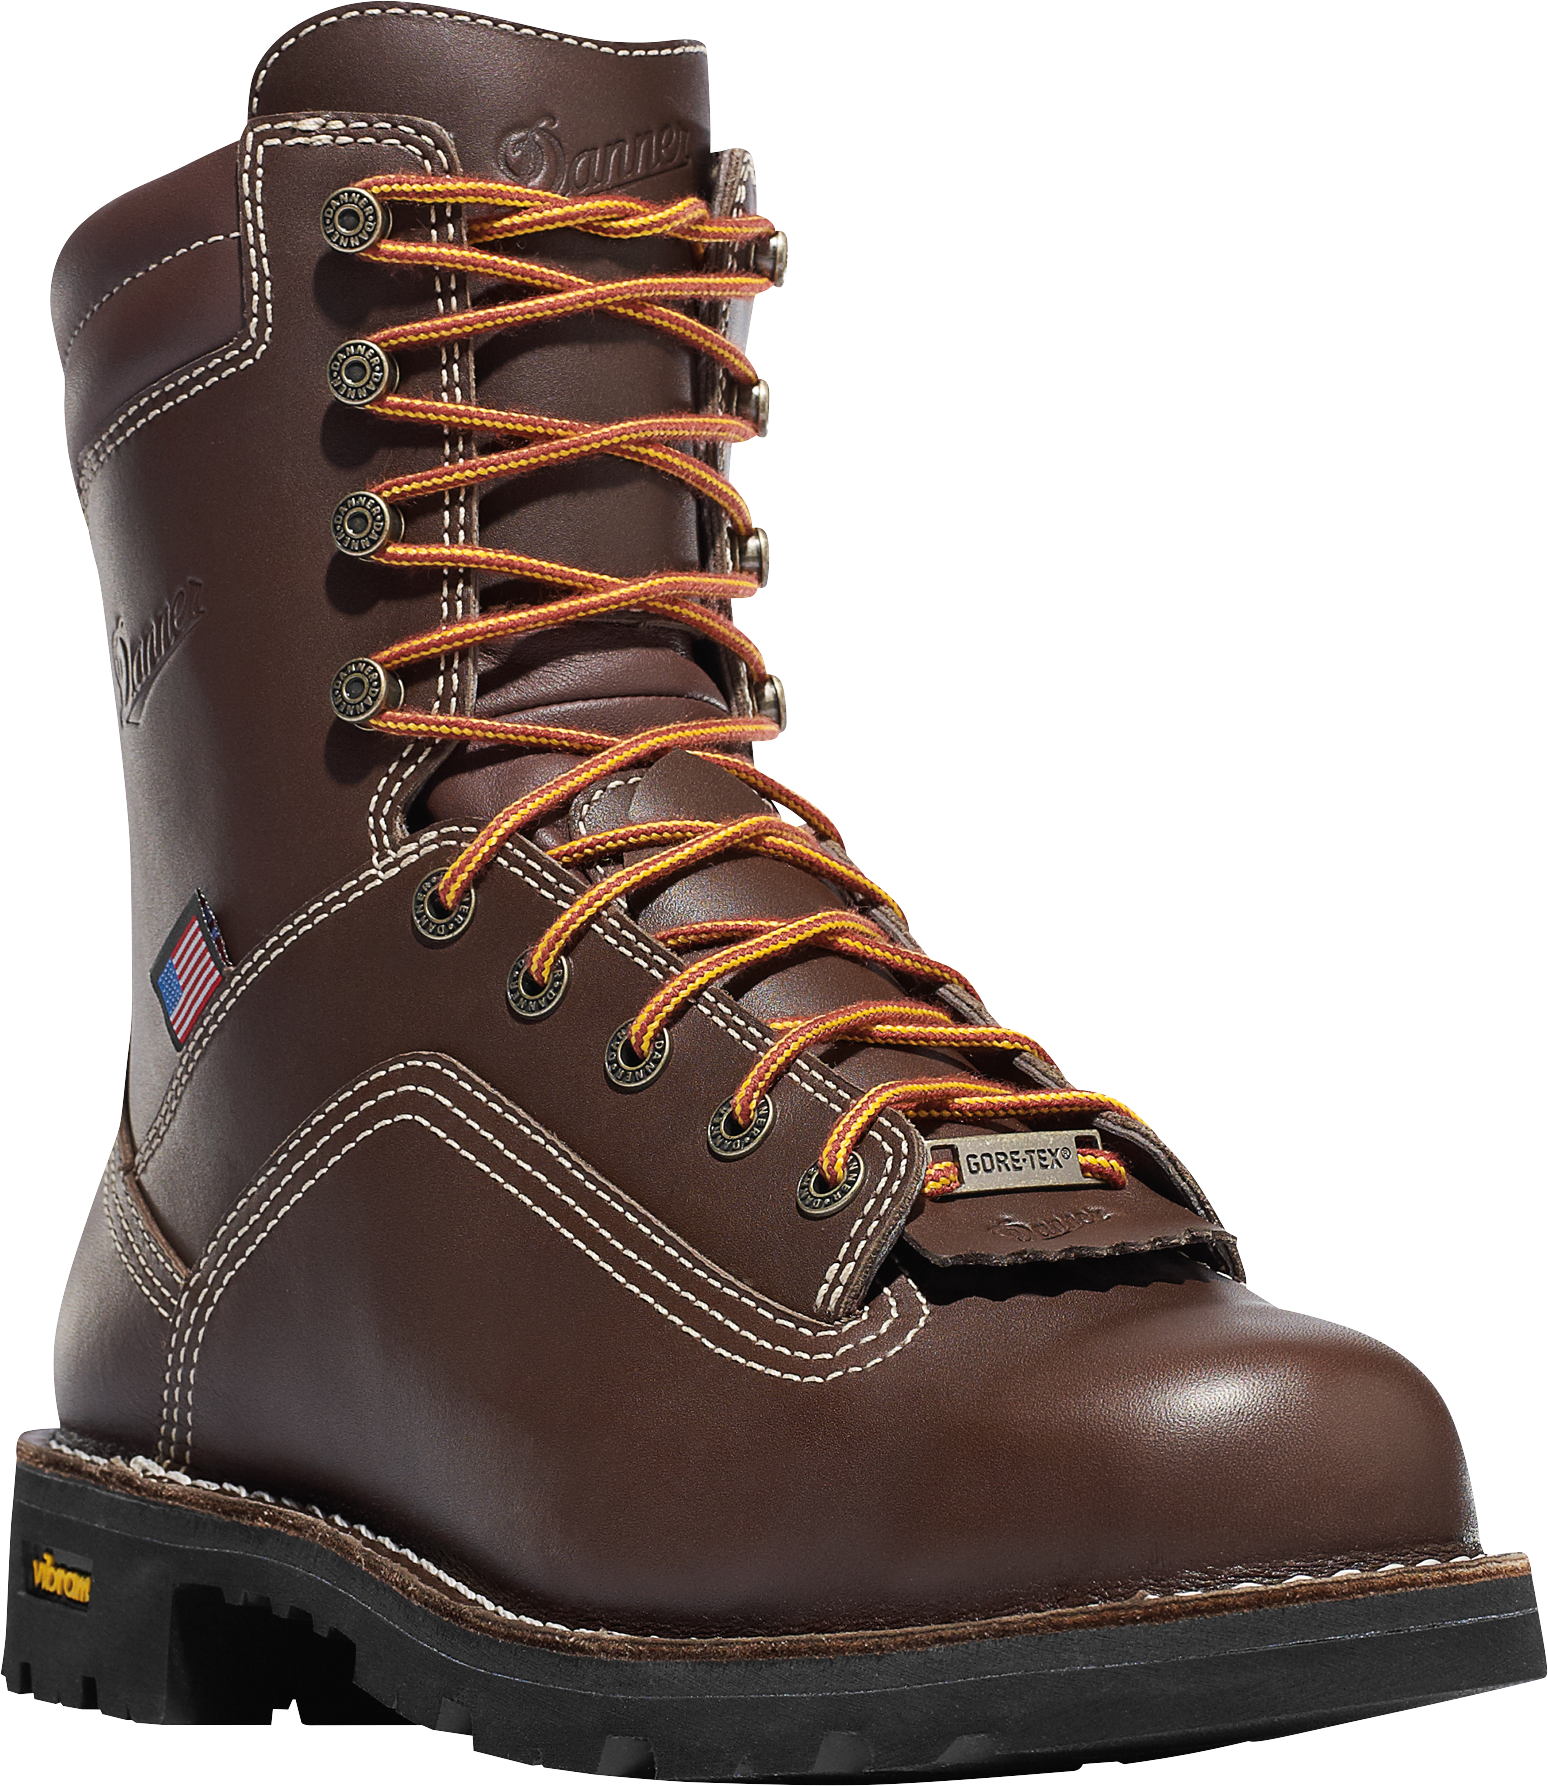 Danner Quarry USA Brown GORE-TEX Alloy Toe Work Boots for Men - Brown - 11.5W